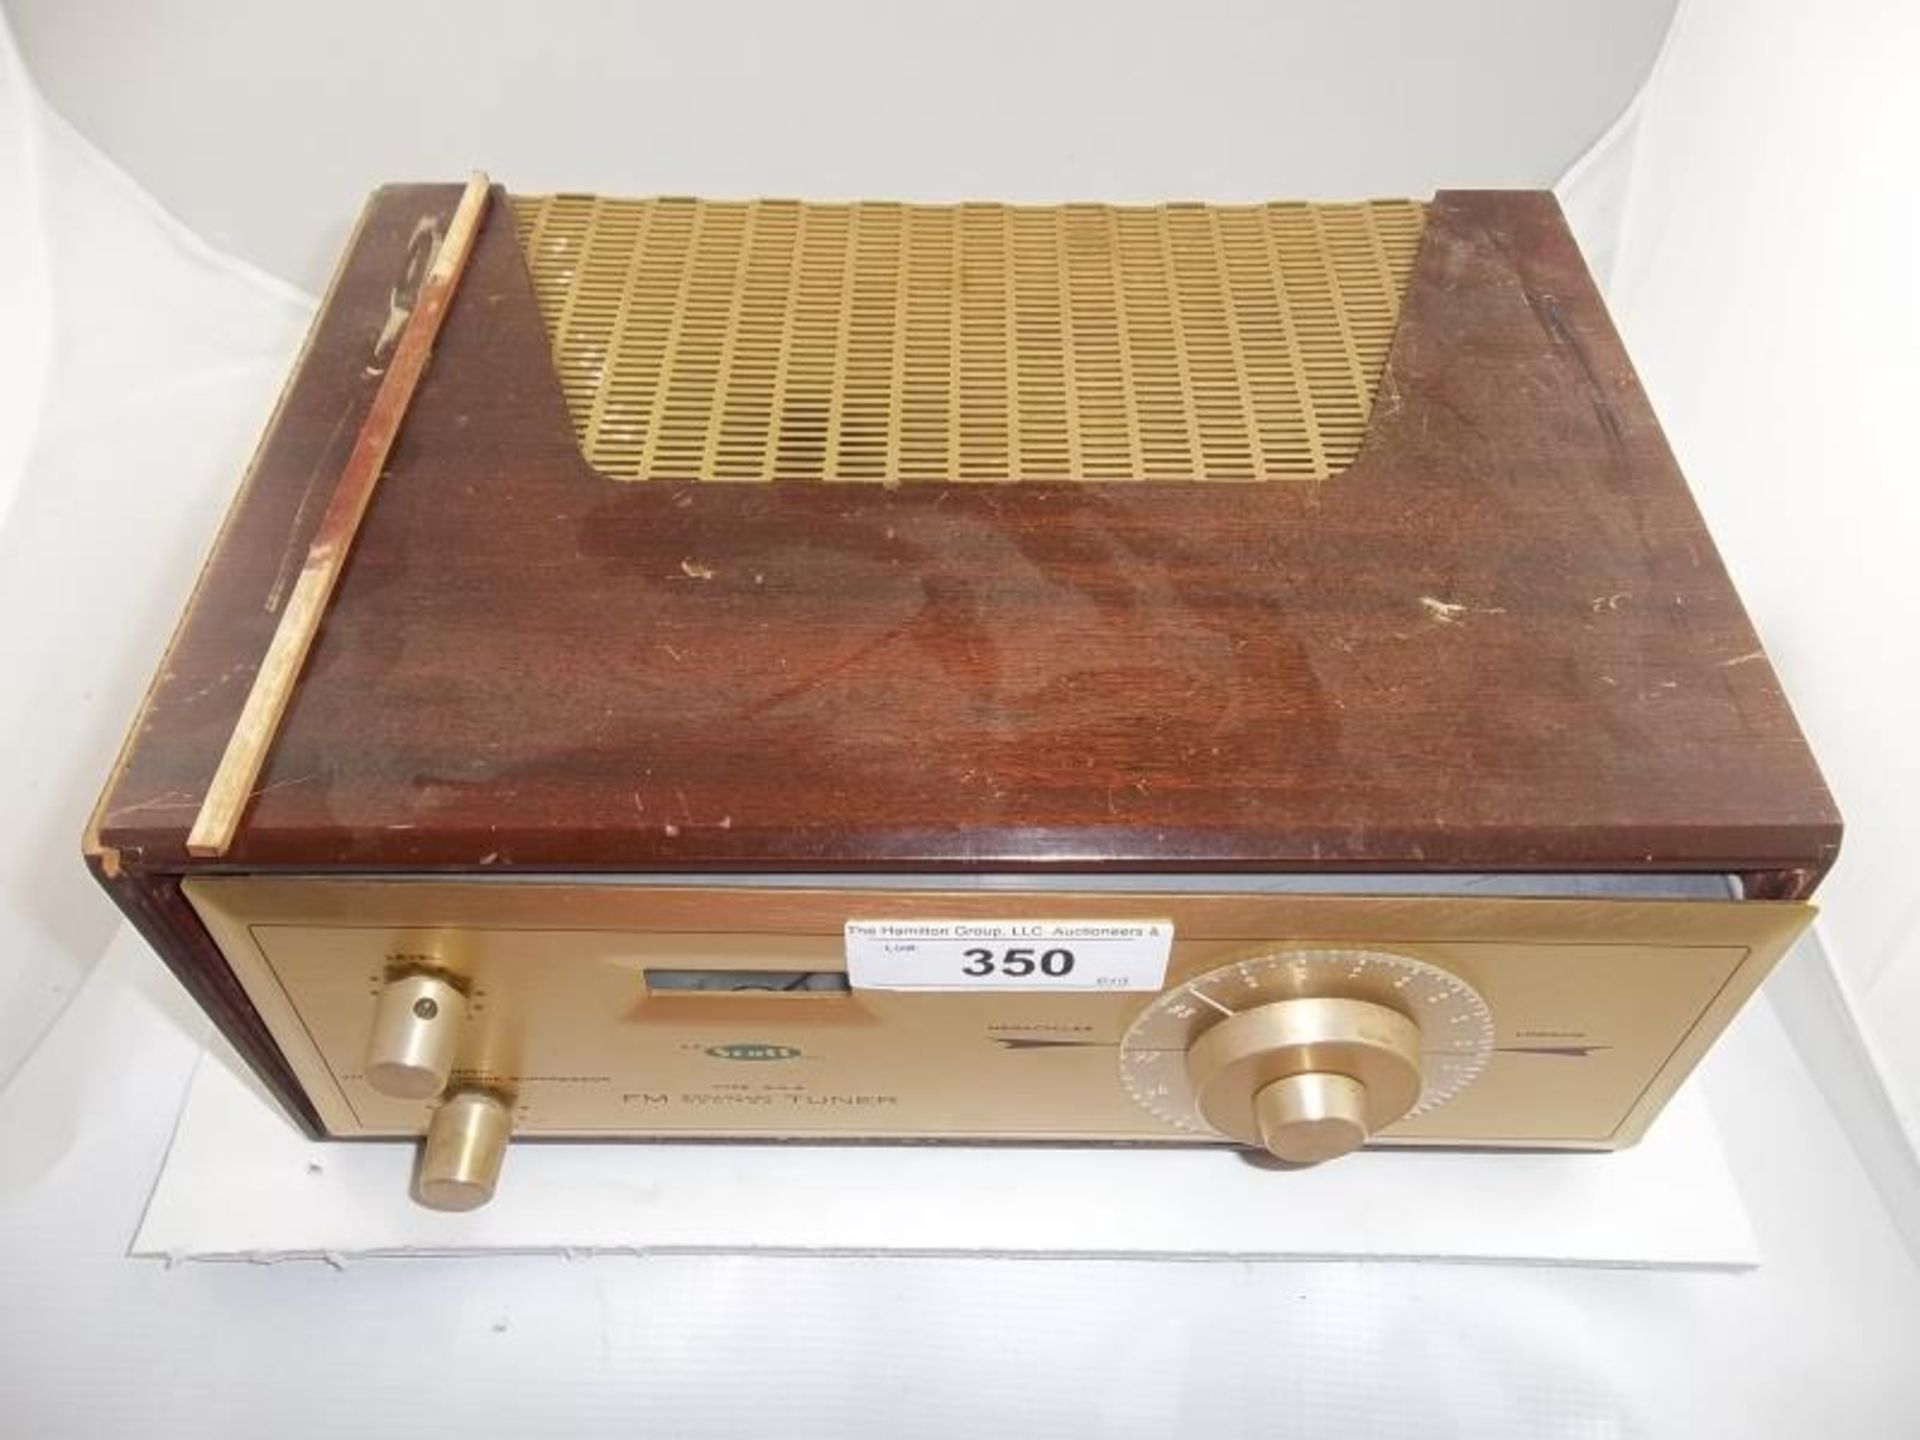 Scott FM Tuner type 310-B, s#26641, wood case broken and scratched, not tested - Image 2 of 6